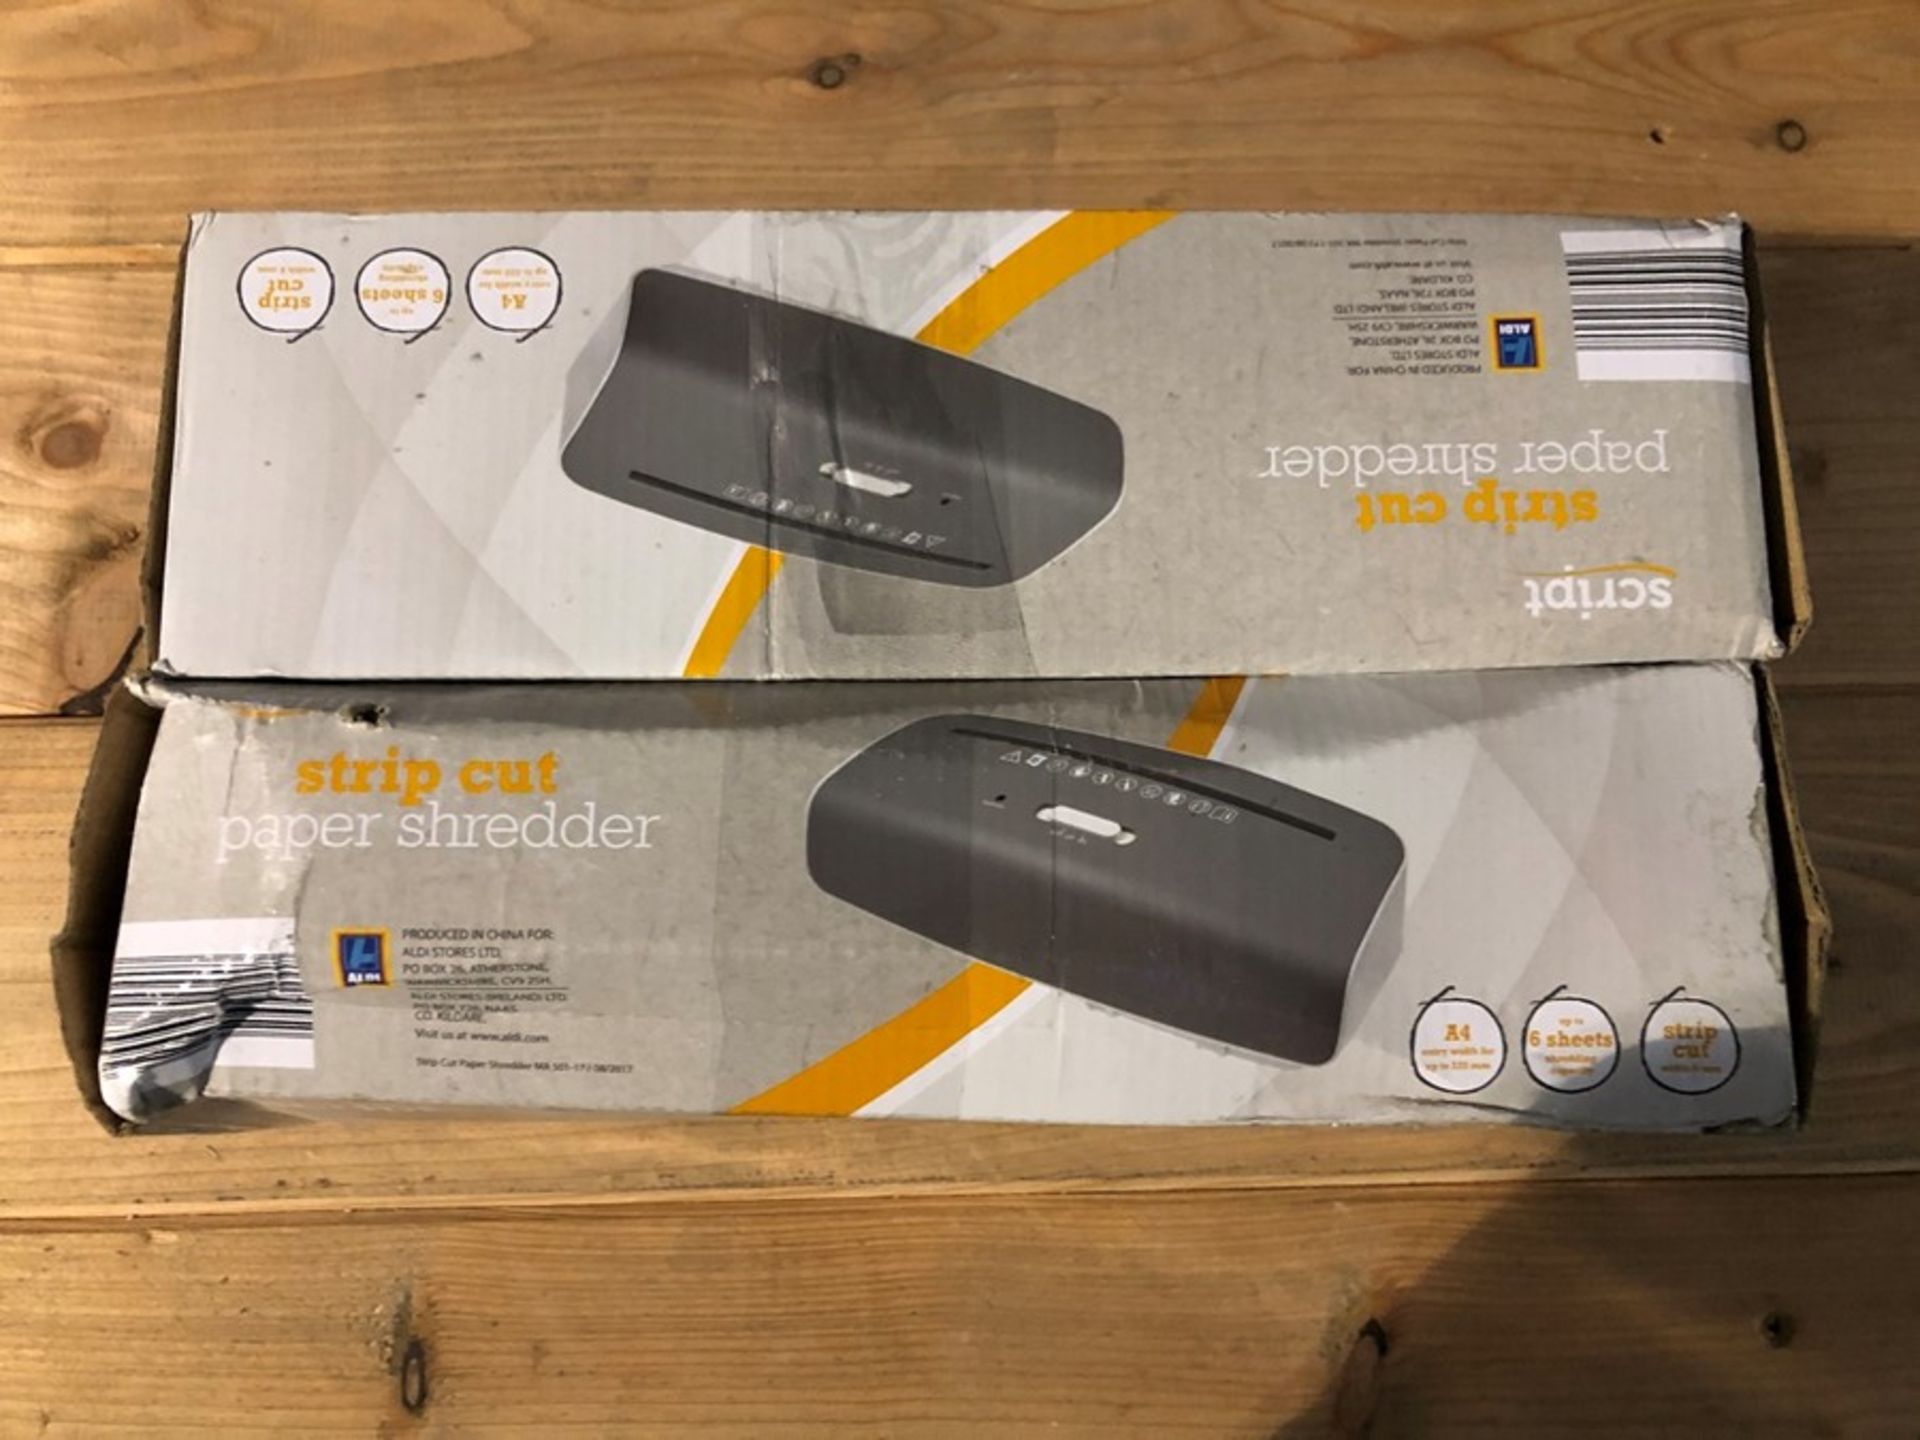 1 LOT TO CONTAIN 2 BOXED SCRIPT STRIP CUT PAPER SHREDDERS / RRP £16.00 (PUBLIC VIEWING AVAILABLE)